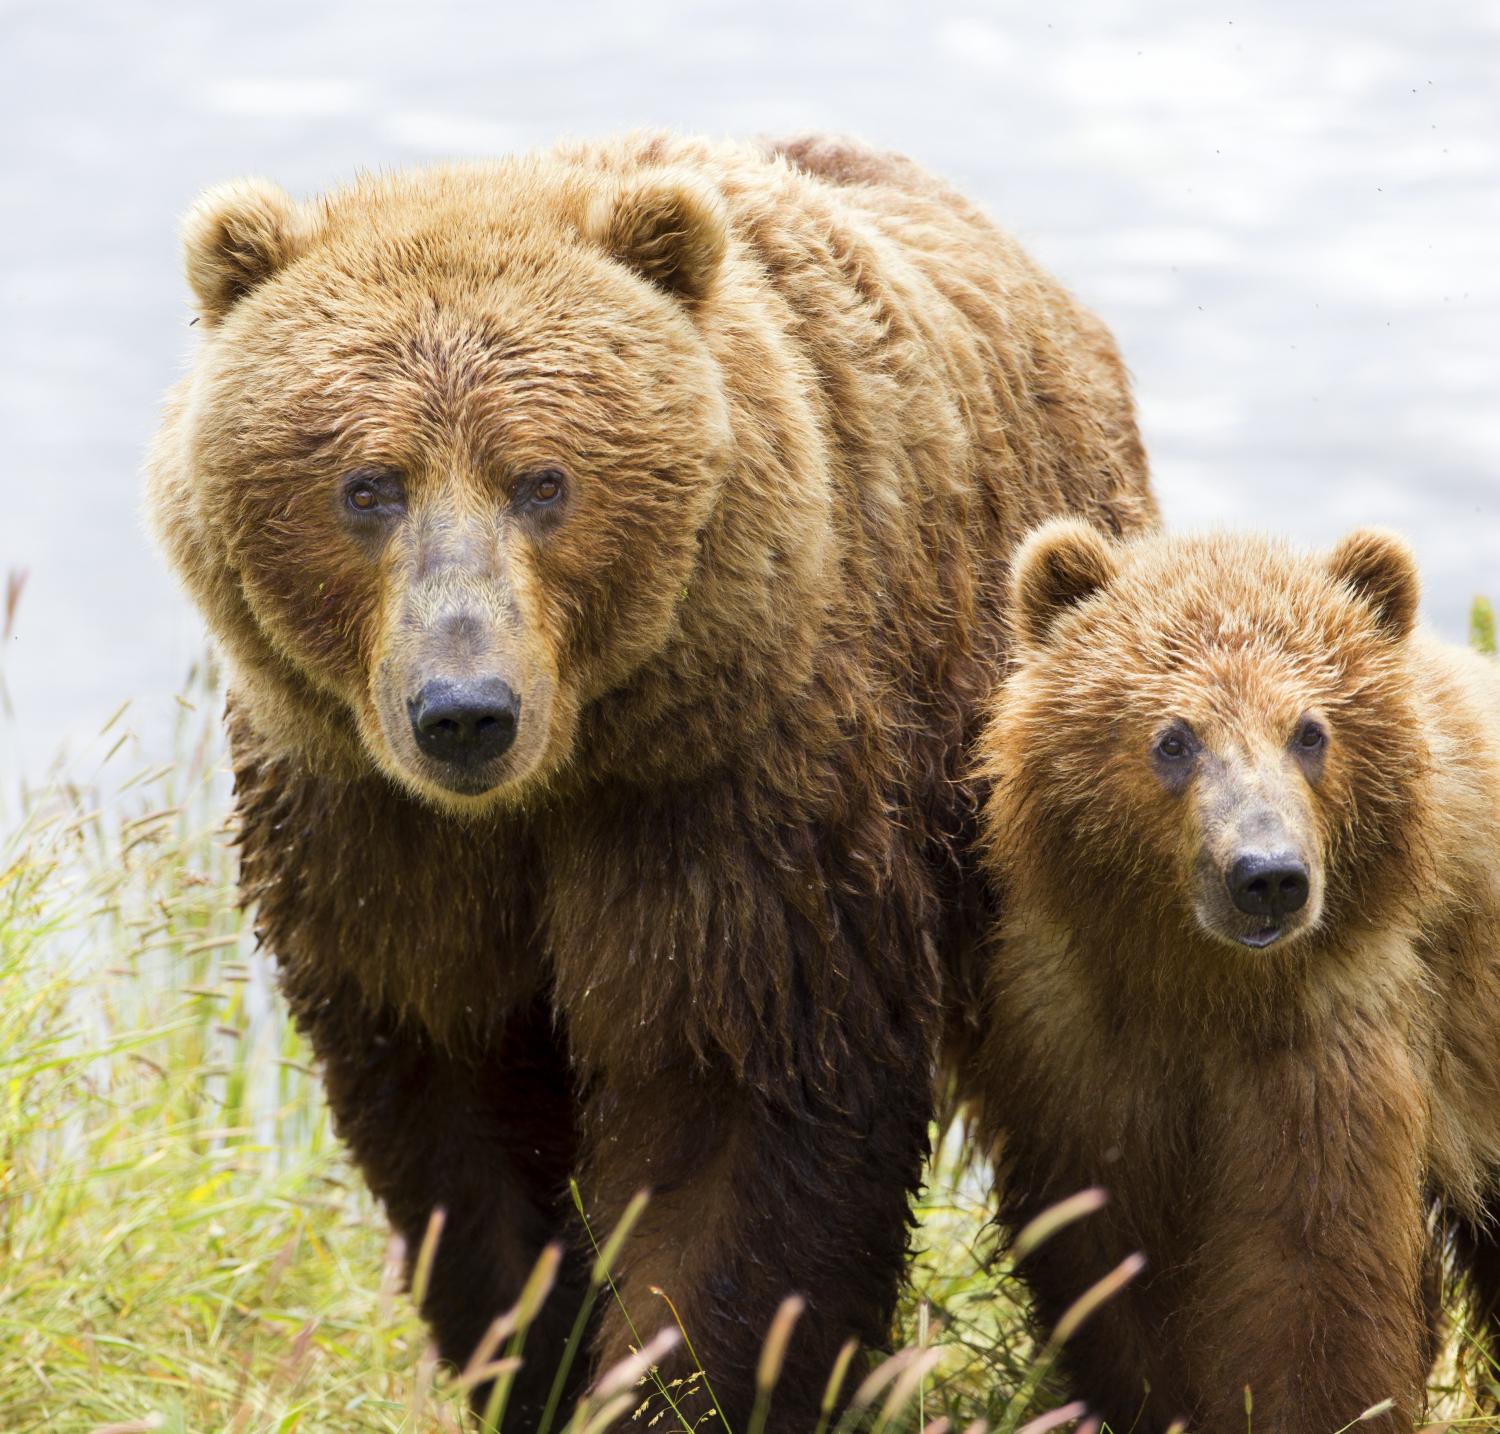 Kodiak Bears Found To Switch To Eating Elderberries Instead Of Salmon As Climate Changes